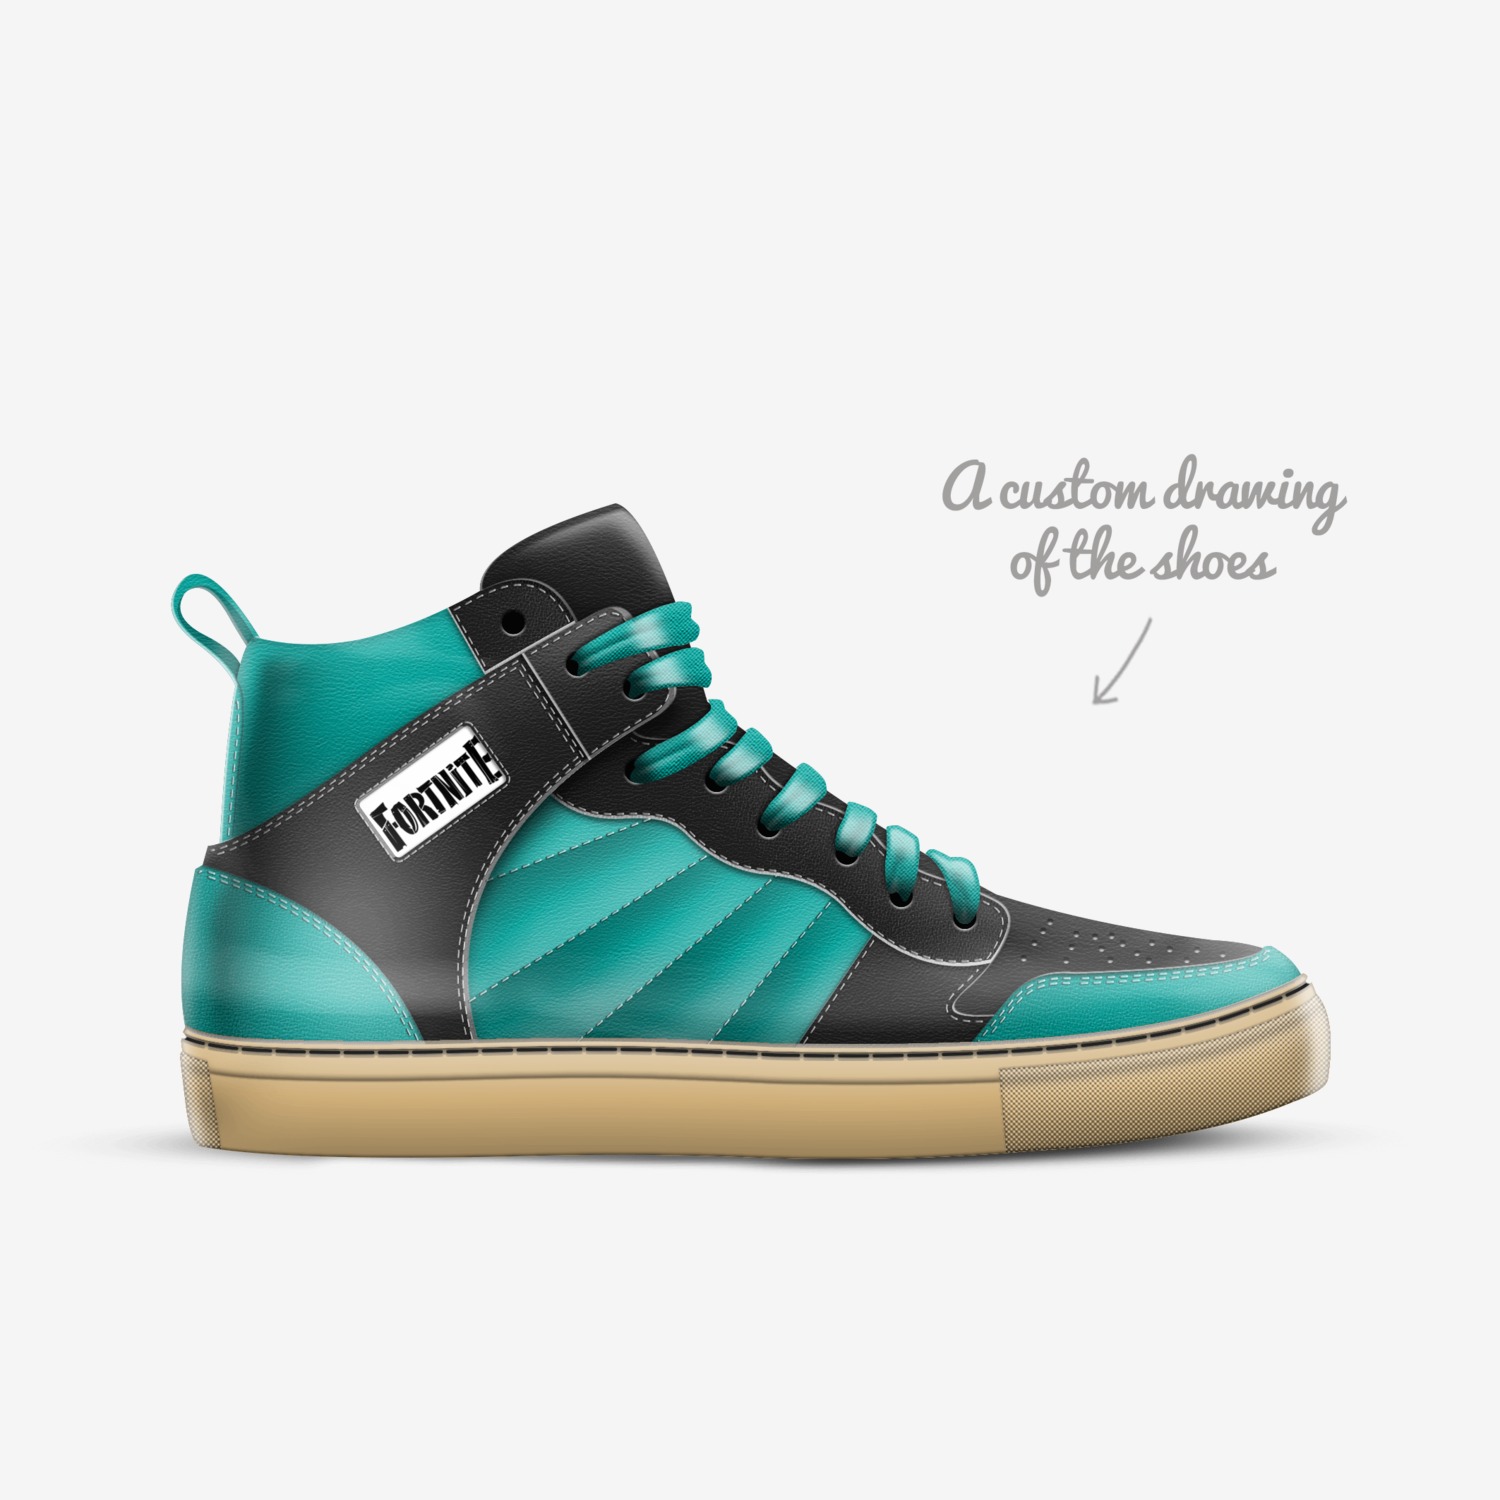 Fortnite Shoes | A Custom Shoe concept by Sean Frizzell